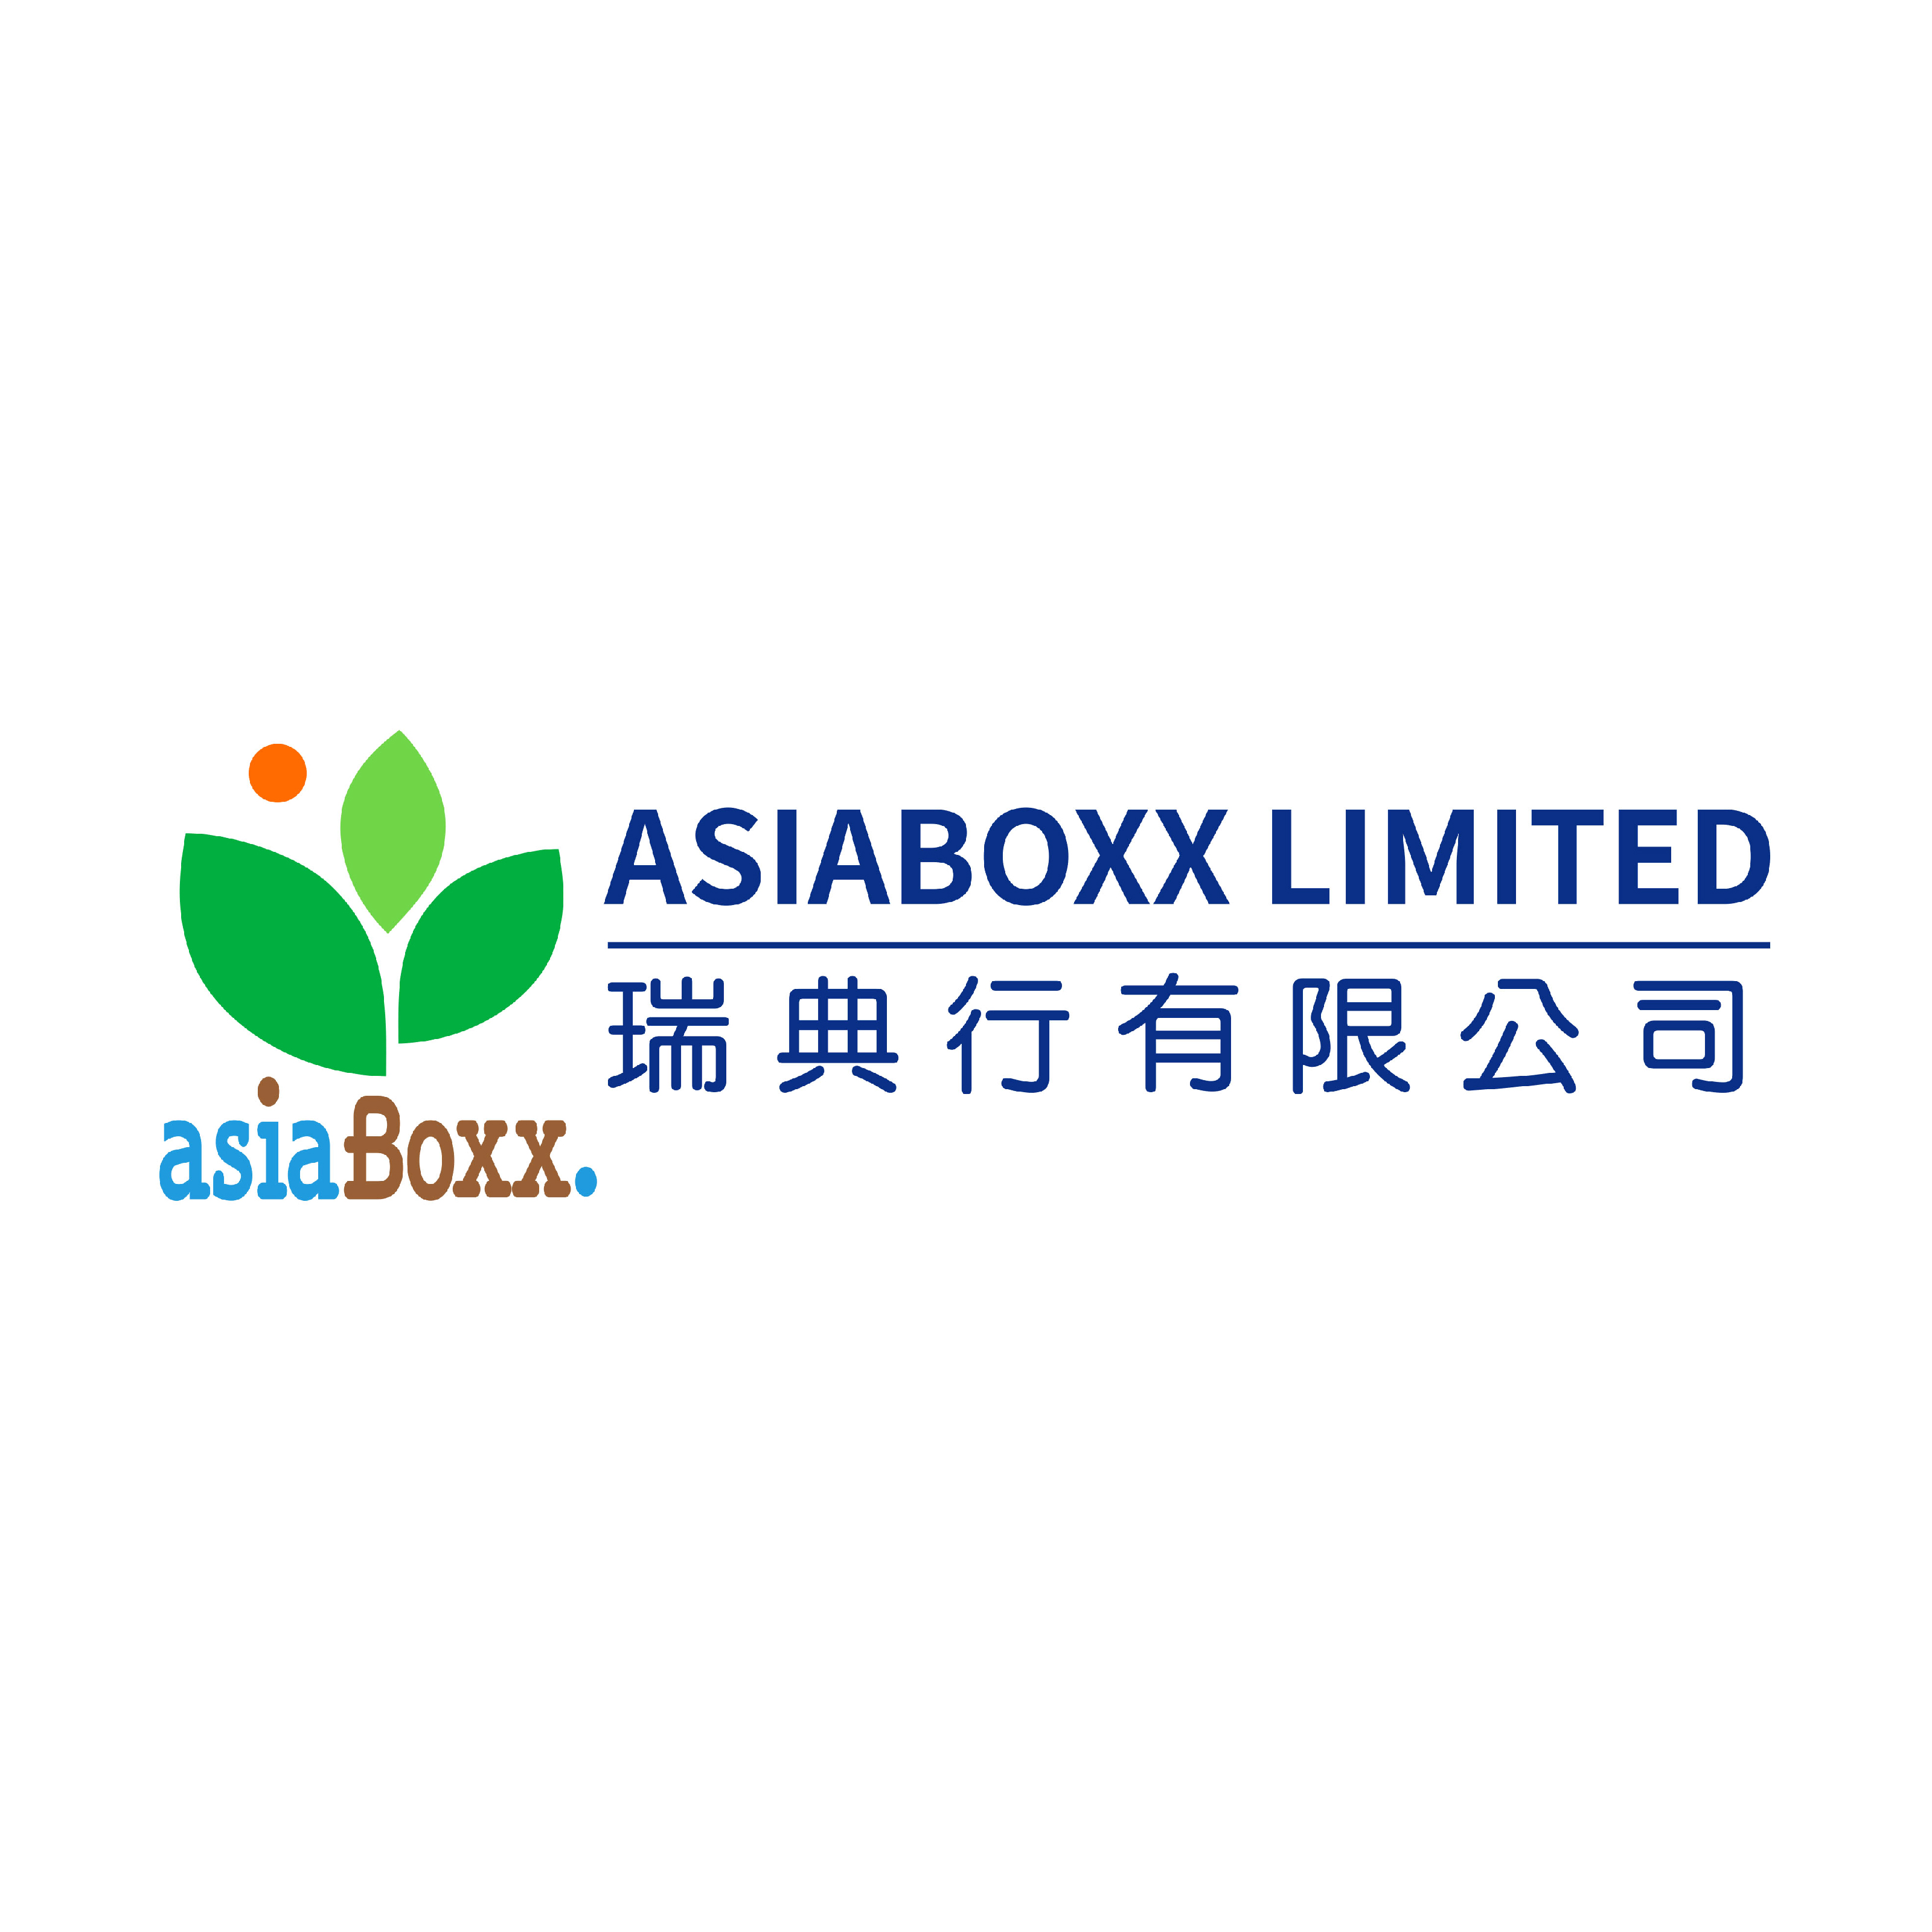 ASIABOXX LIMITED